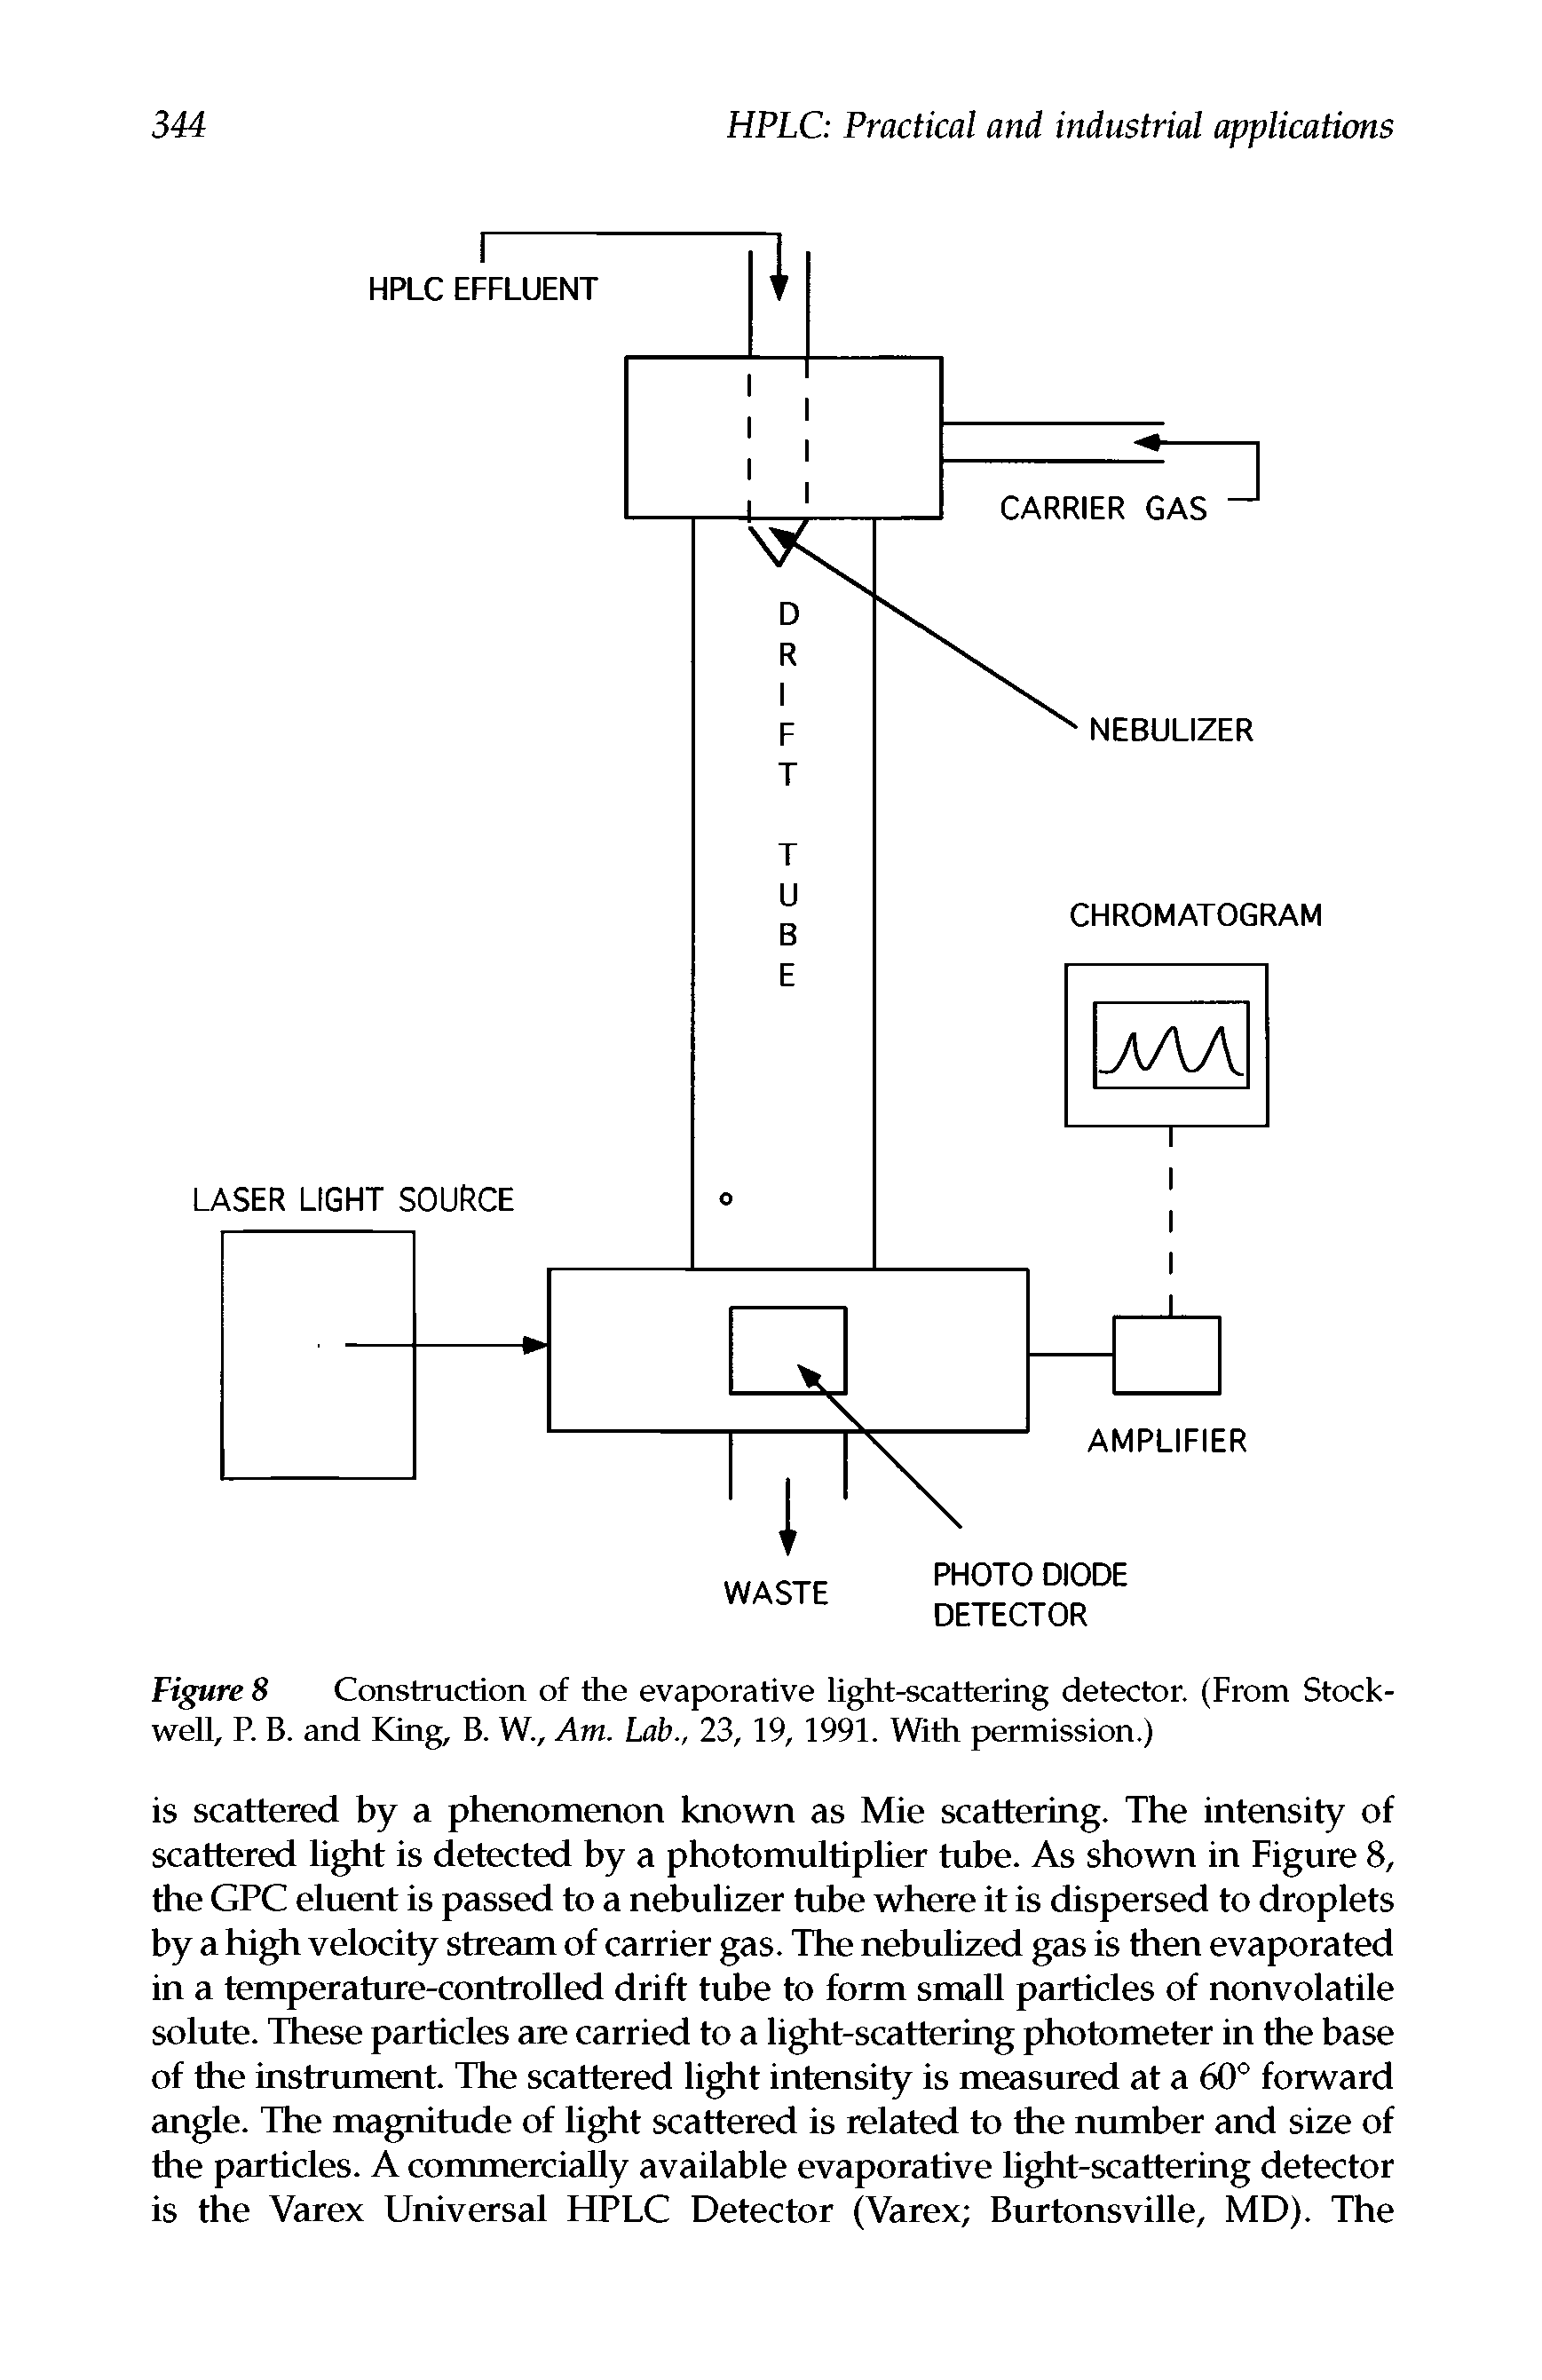 Figure 8 Construction of the evaporative light-scattering detector. (From Stock-well, P. B. and King, B. W., Am. Lab., 23, 19, 1991. With permission.)...